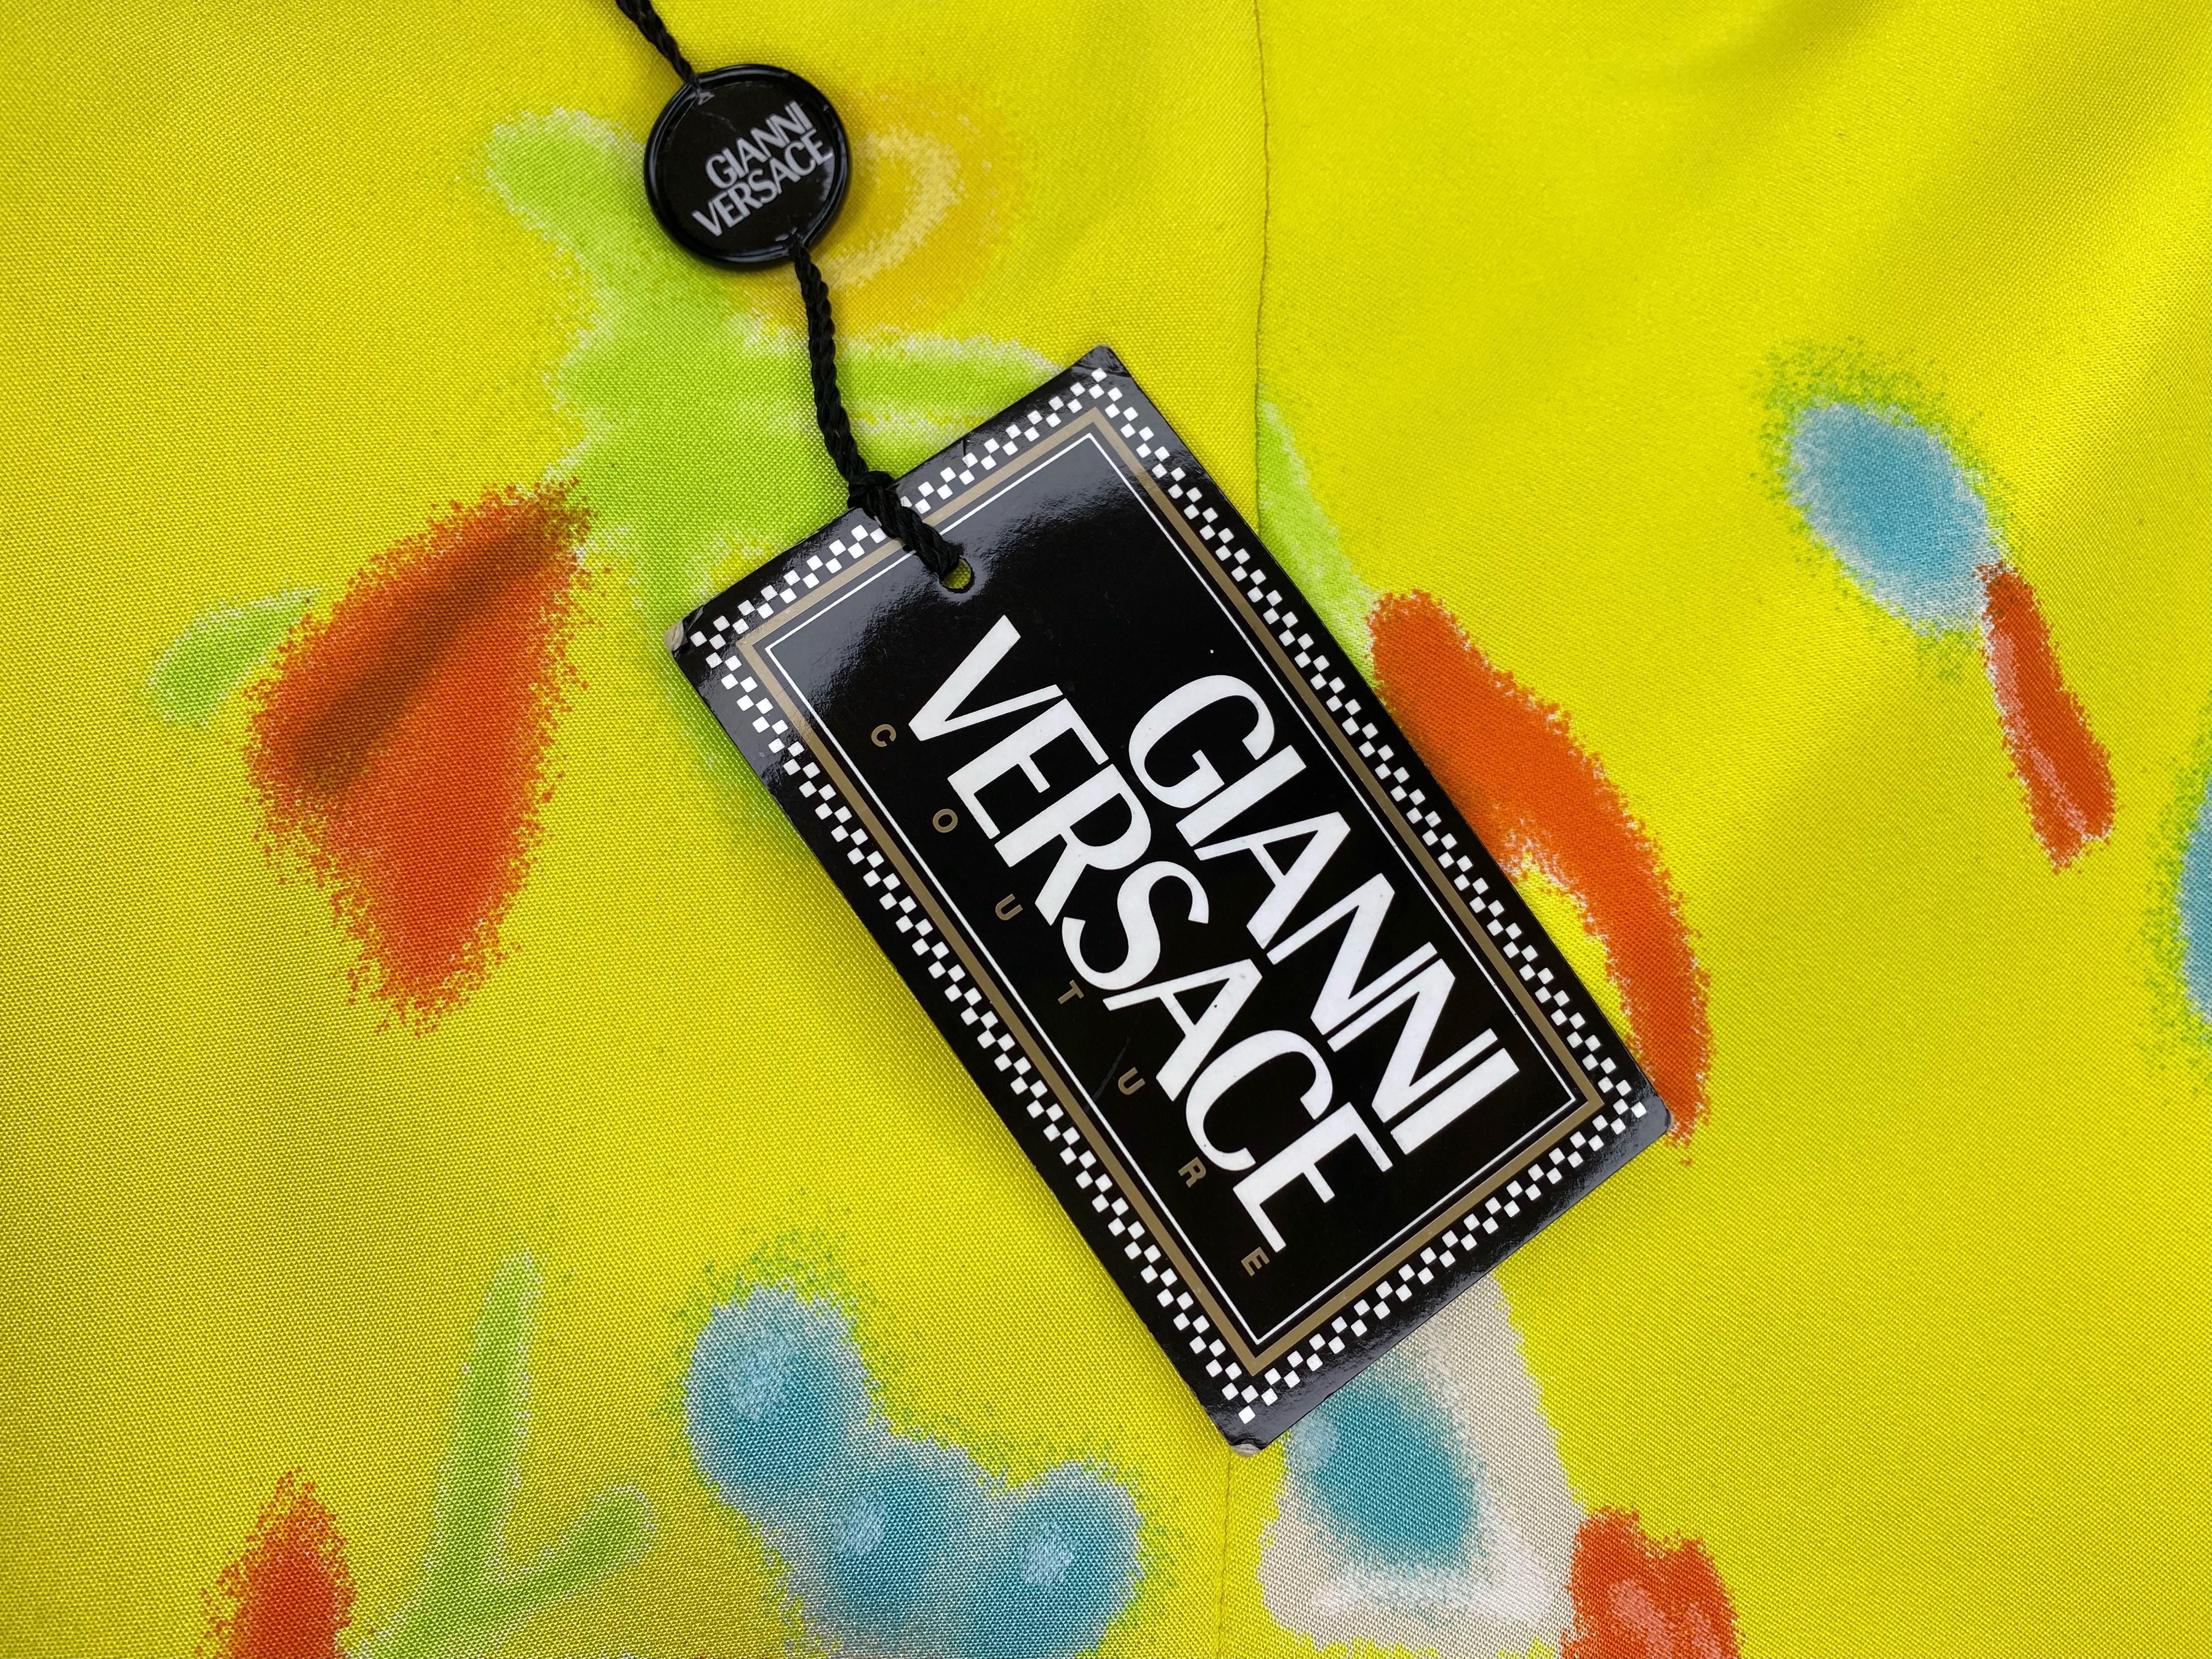 NWT S/S 1996 Gianni Versace Couture Neon Yellow Graffiti Floral Print Skirt For Sale 4